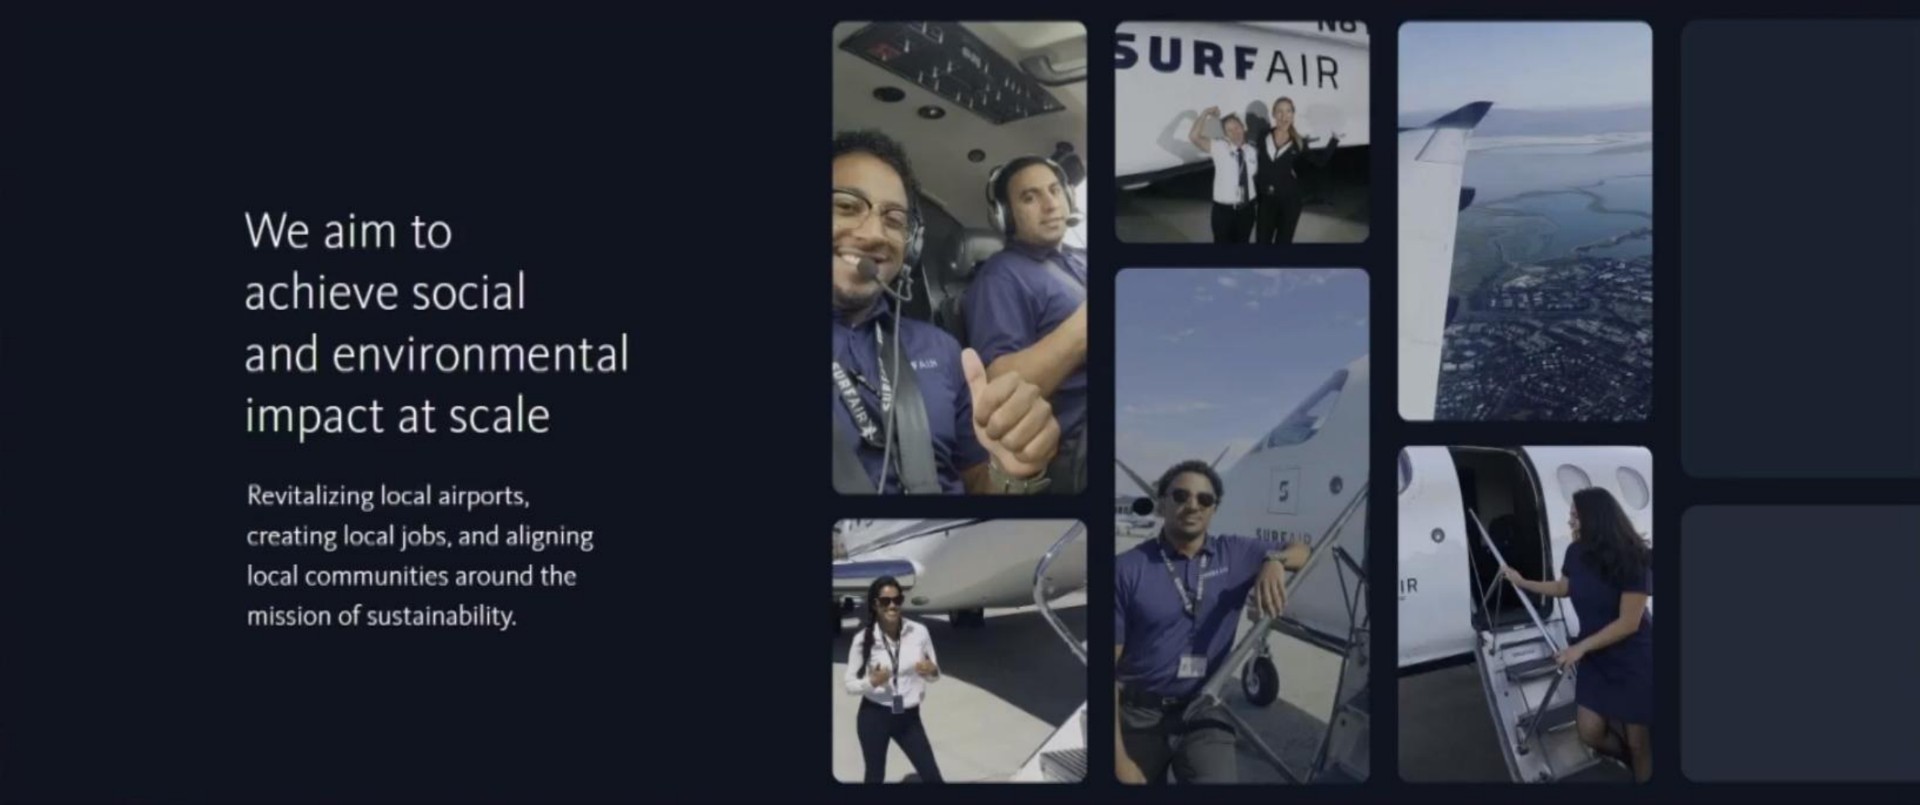 we aim to achieve social and environmental impact at scale local communities around the a creating local jobs and aligning mission of | Surf Air